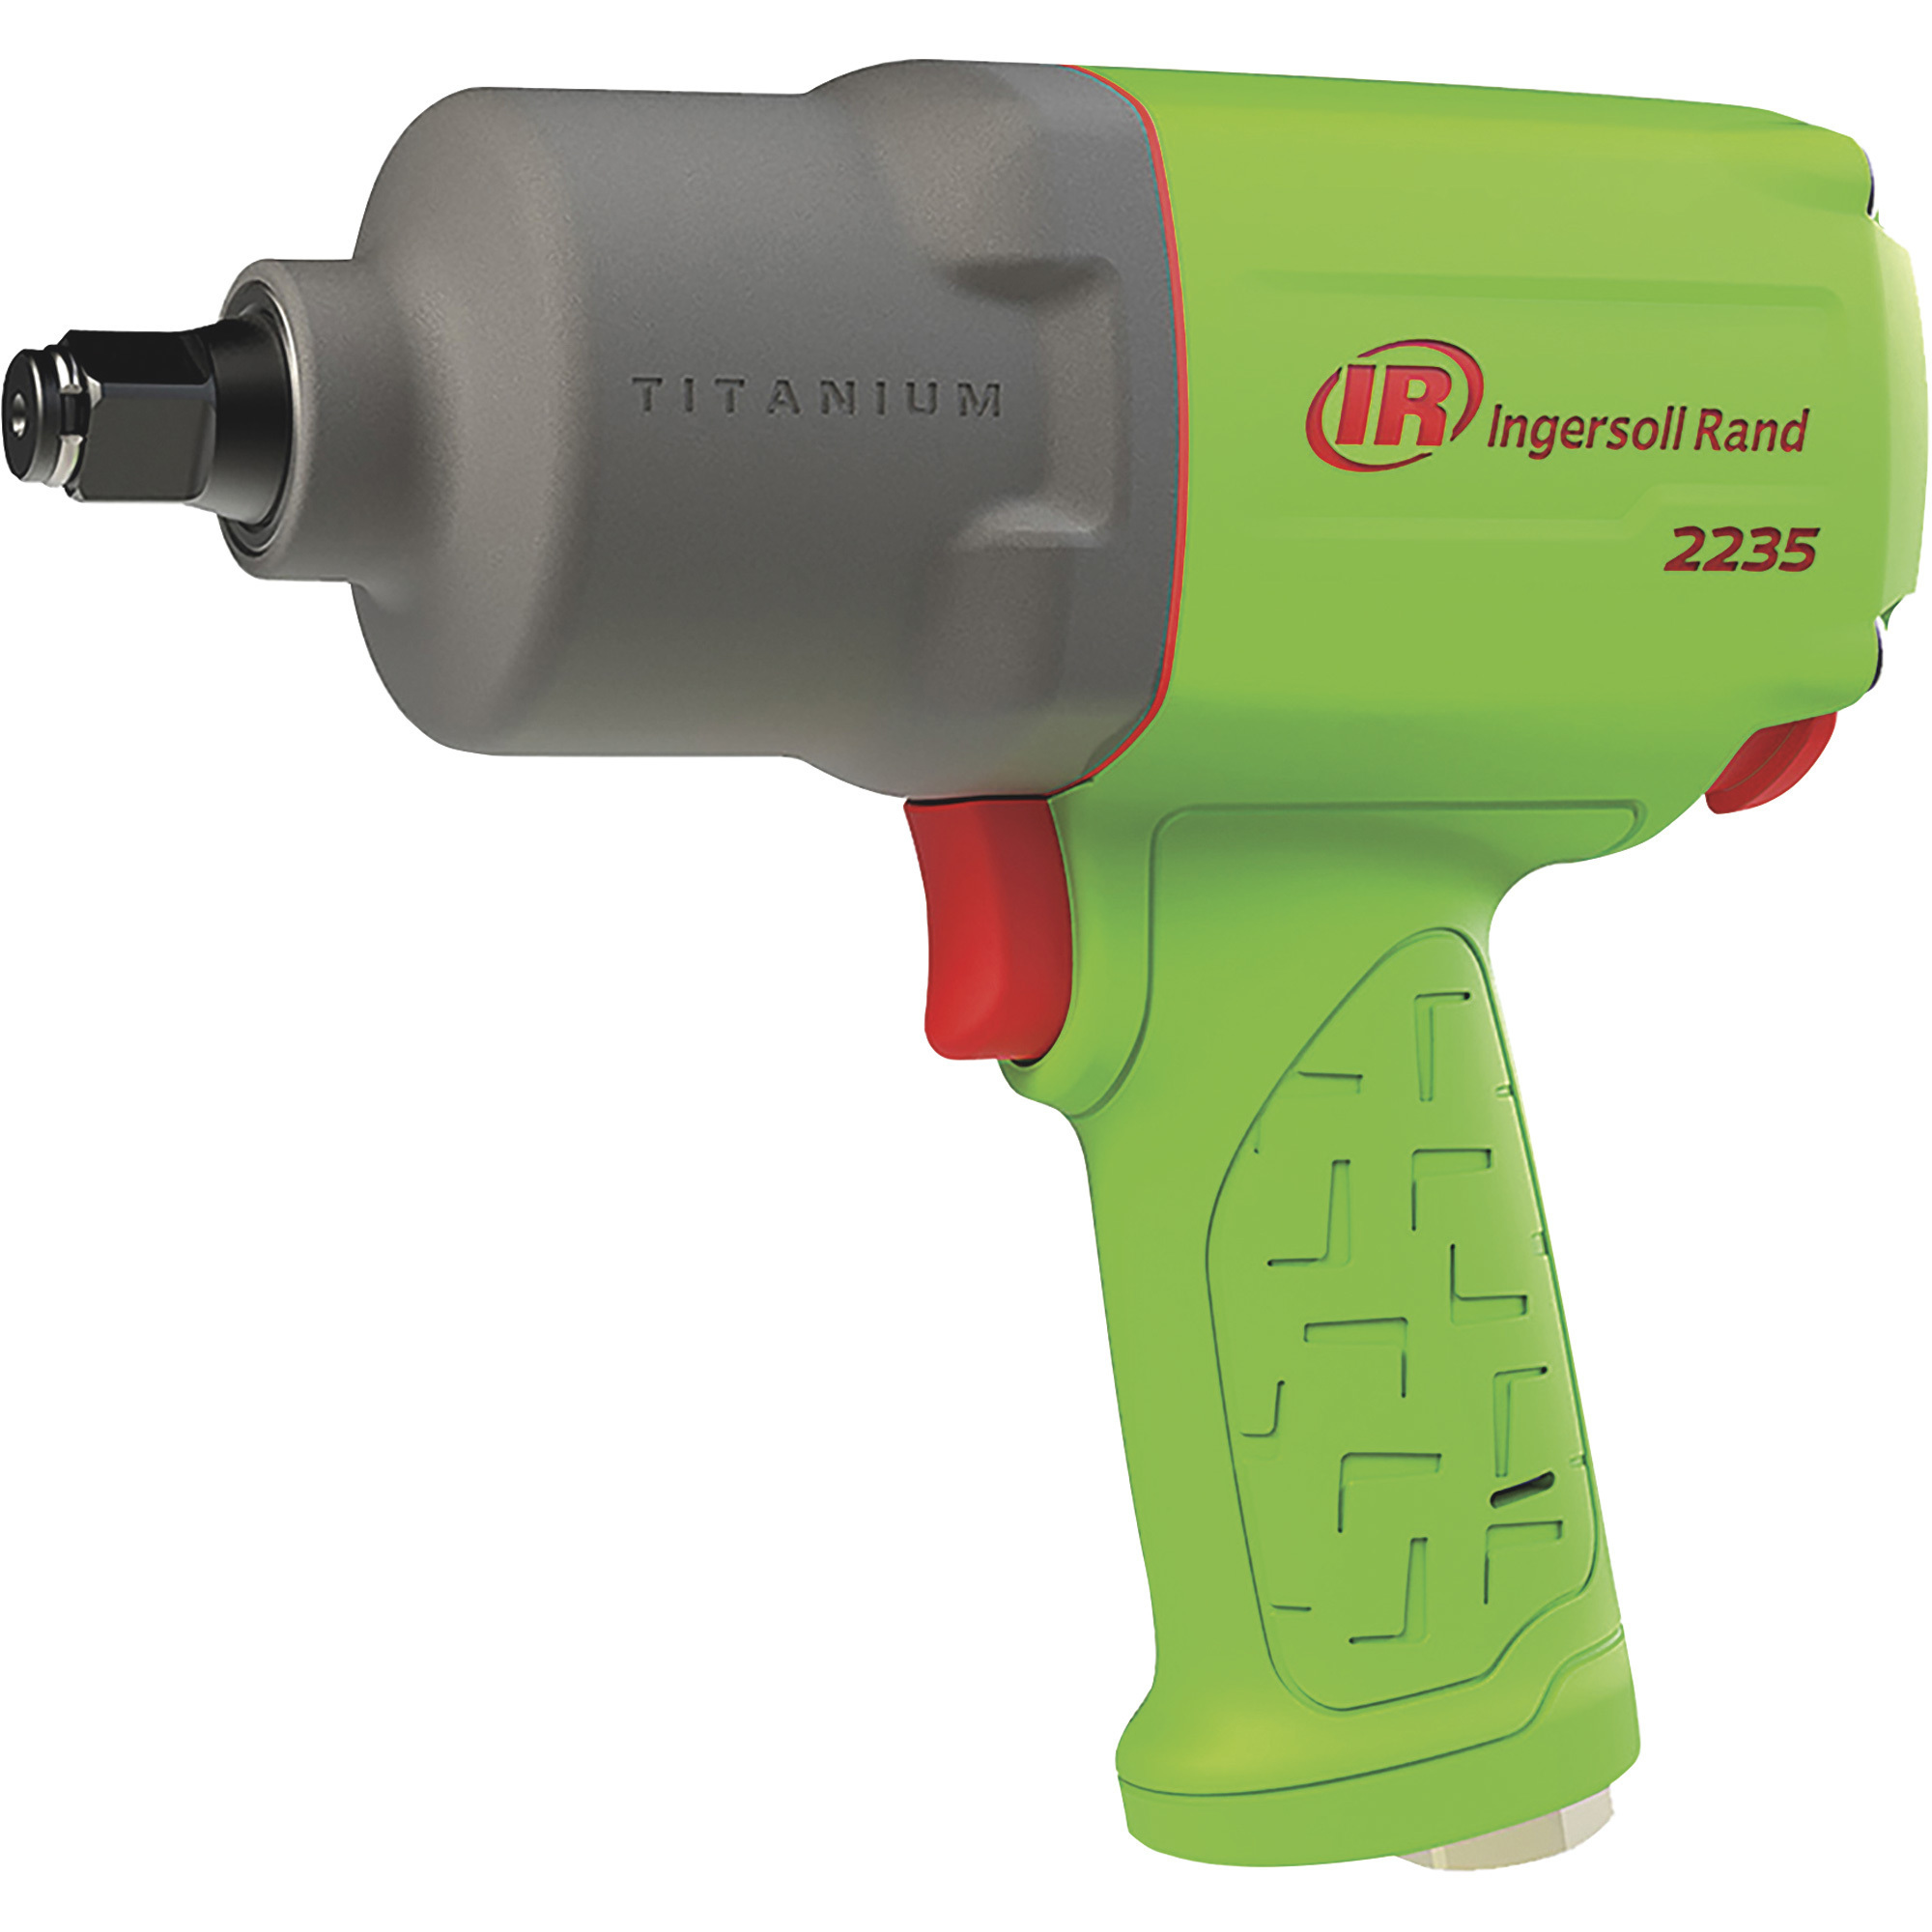 Air Impact Wrench — 1/2Inch Drive, Hi-Vis Green, 1350 Ft./Lbs. Max Torque, Model - Ingersoll Rand 2235TIMAX-G